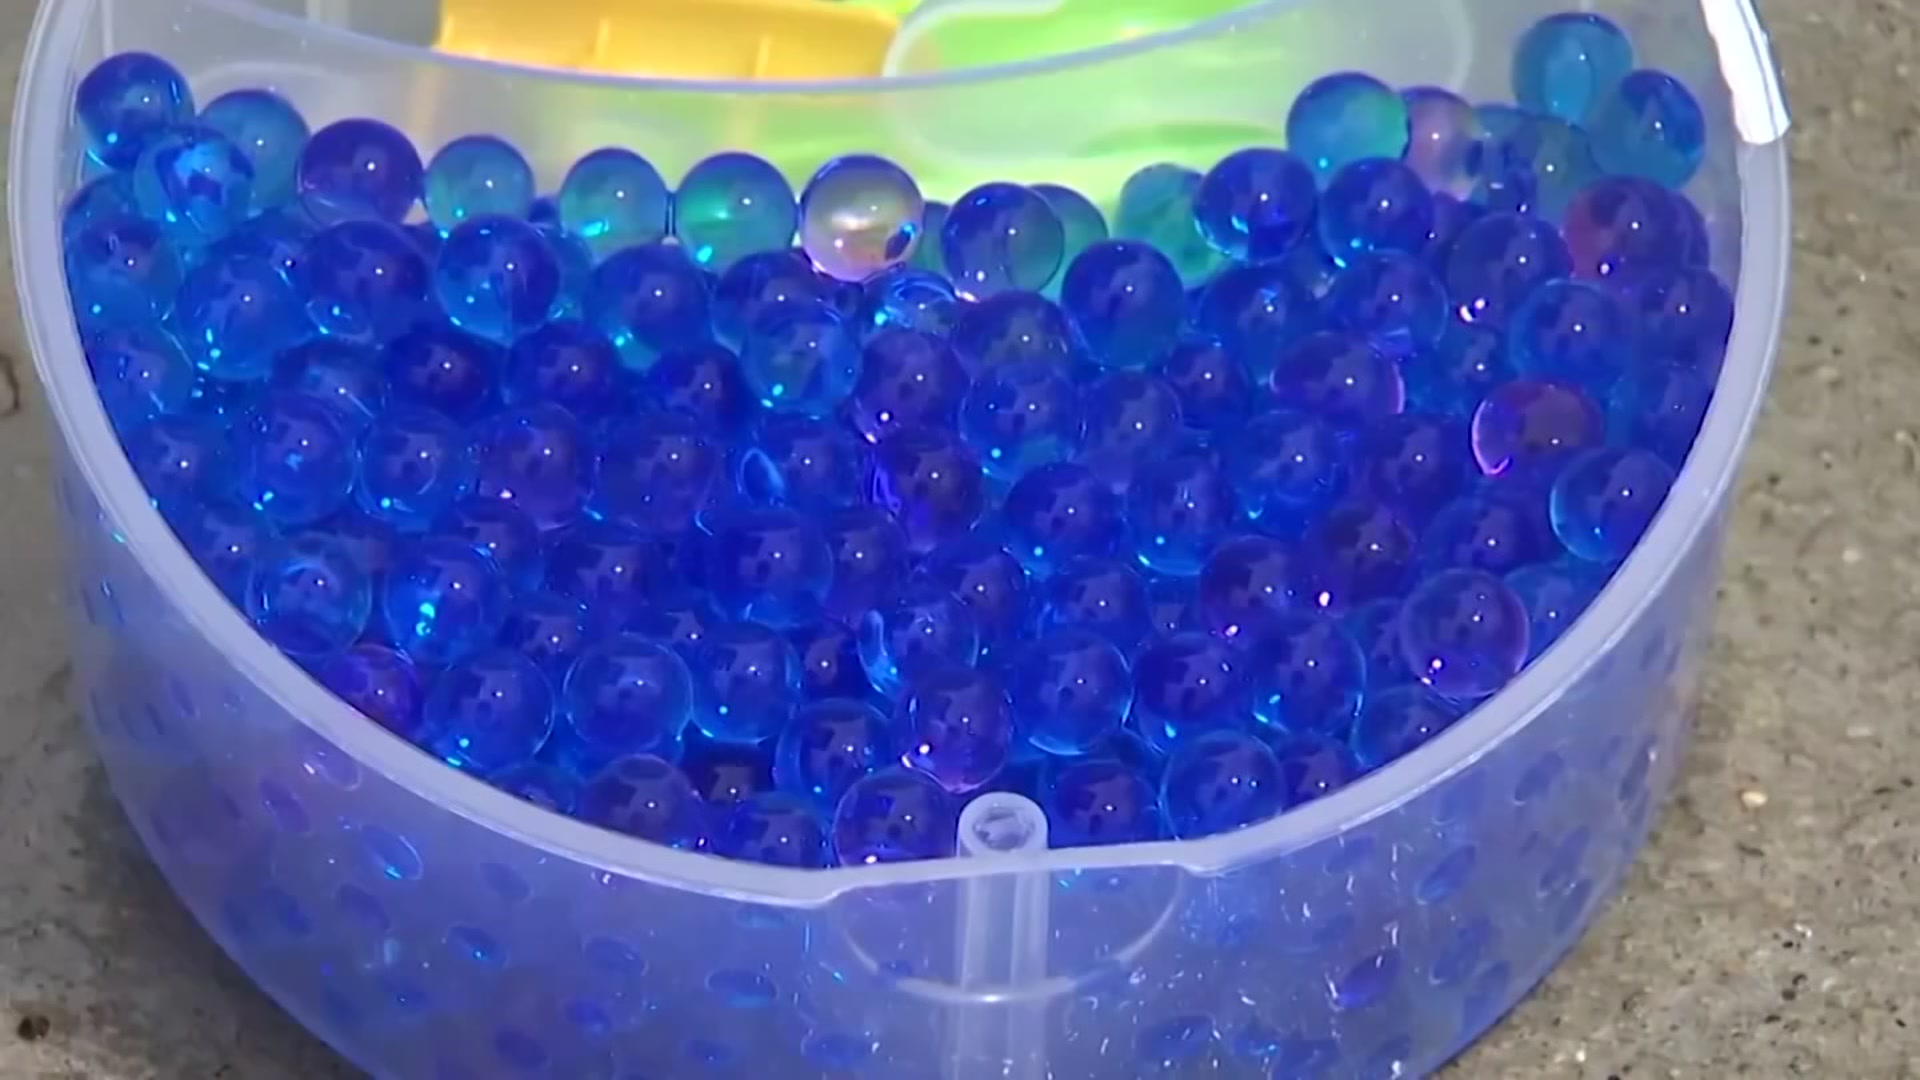  Target and Walmart stop selling water beads